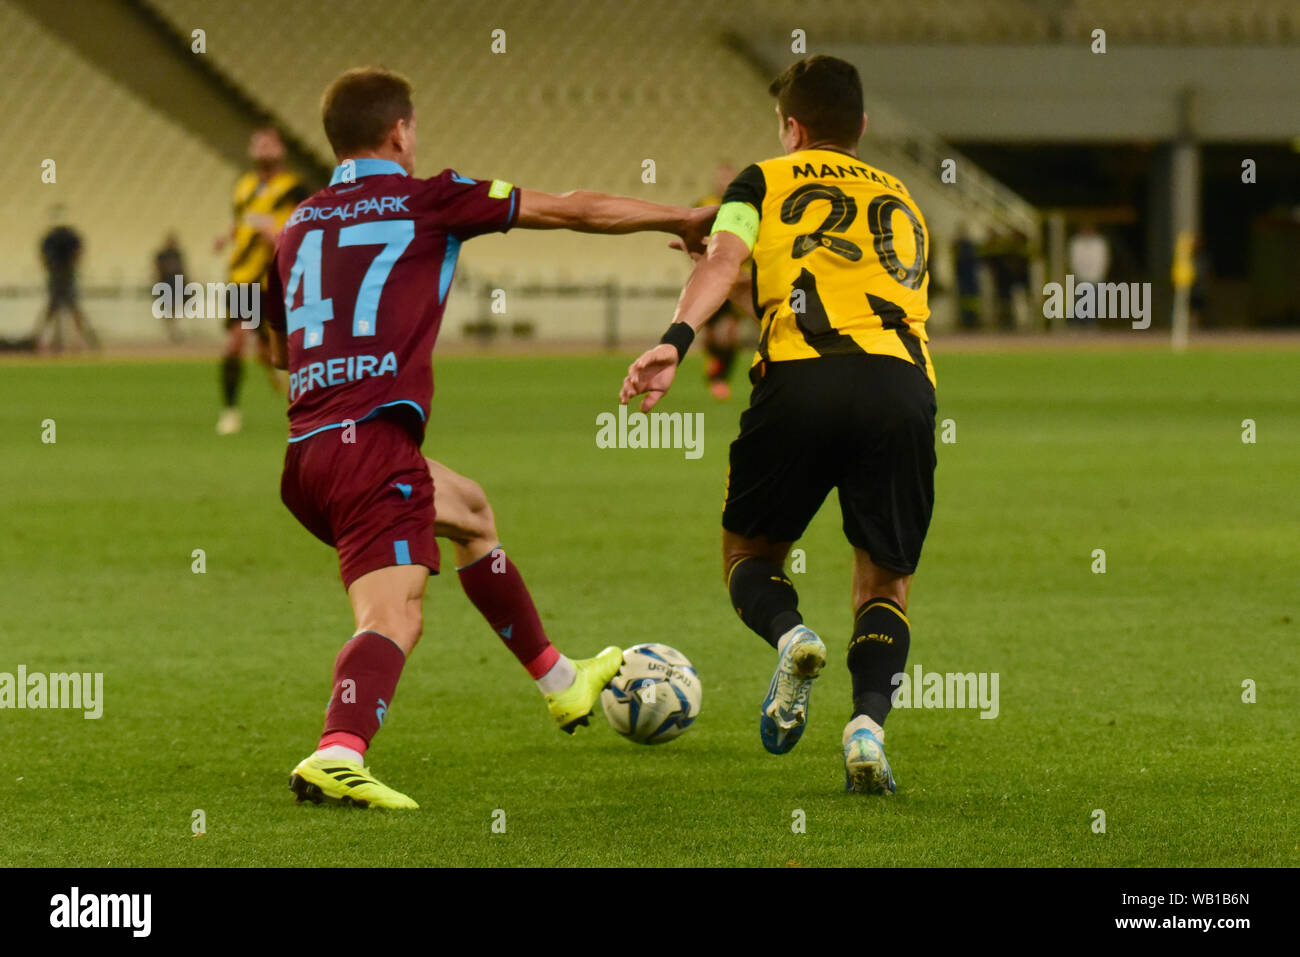 Mantalos (no 20) of AEK tries to avoid Pereira (no 47) of Trabzonspor.AEK  didn't make it, despite scoring in the 4 ', eventually lost 3-1 to  Trabzonspor in the first game of